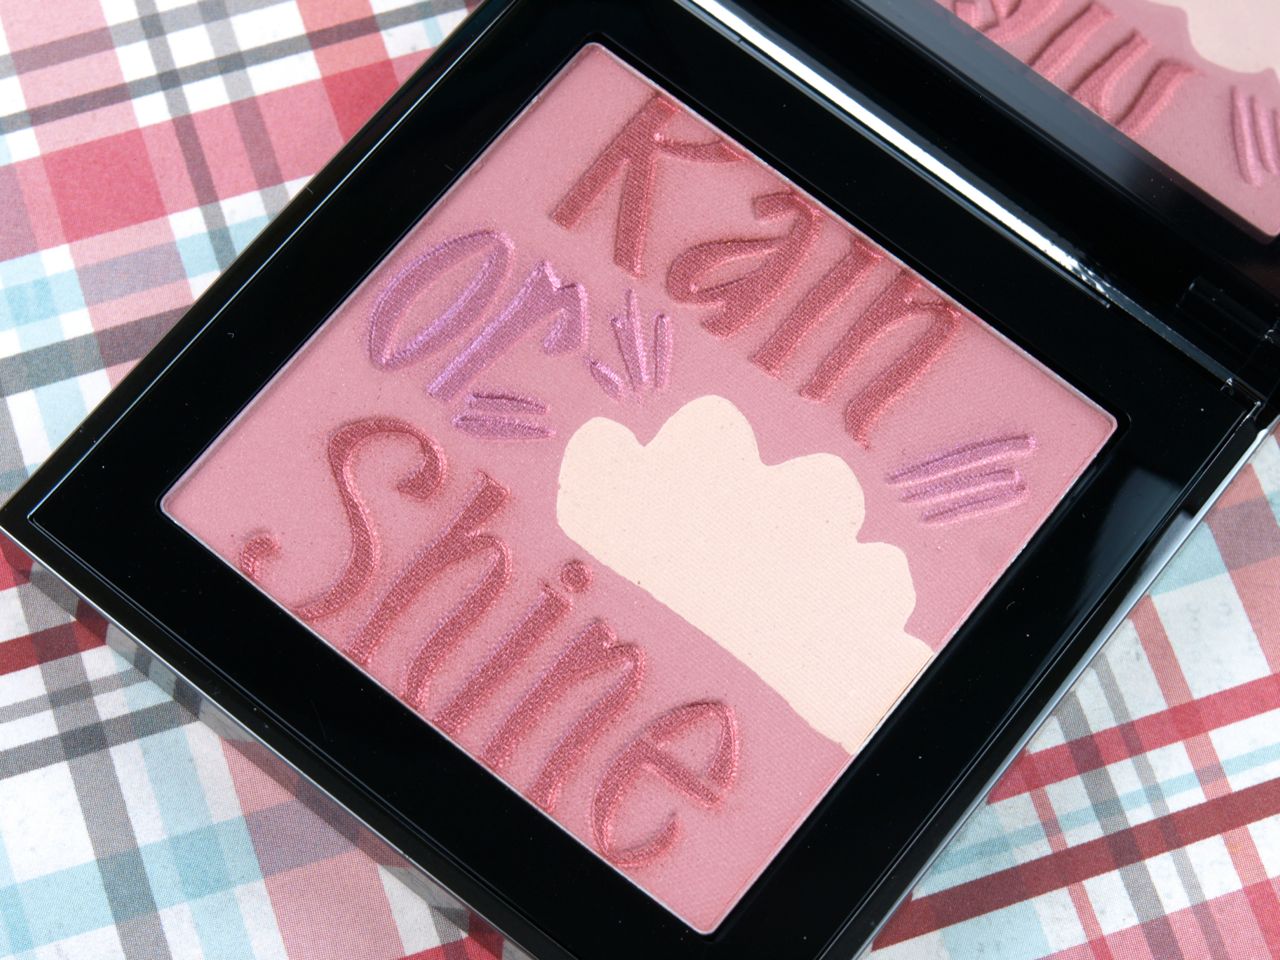 Burberry Spring & Summer 2015 Rain or Shine Blush Highlighter Palette: Review and Swatches